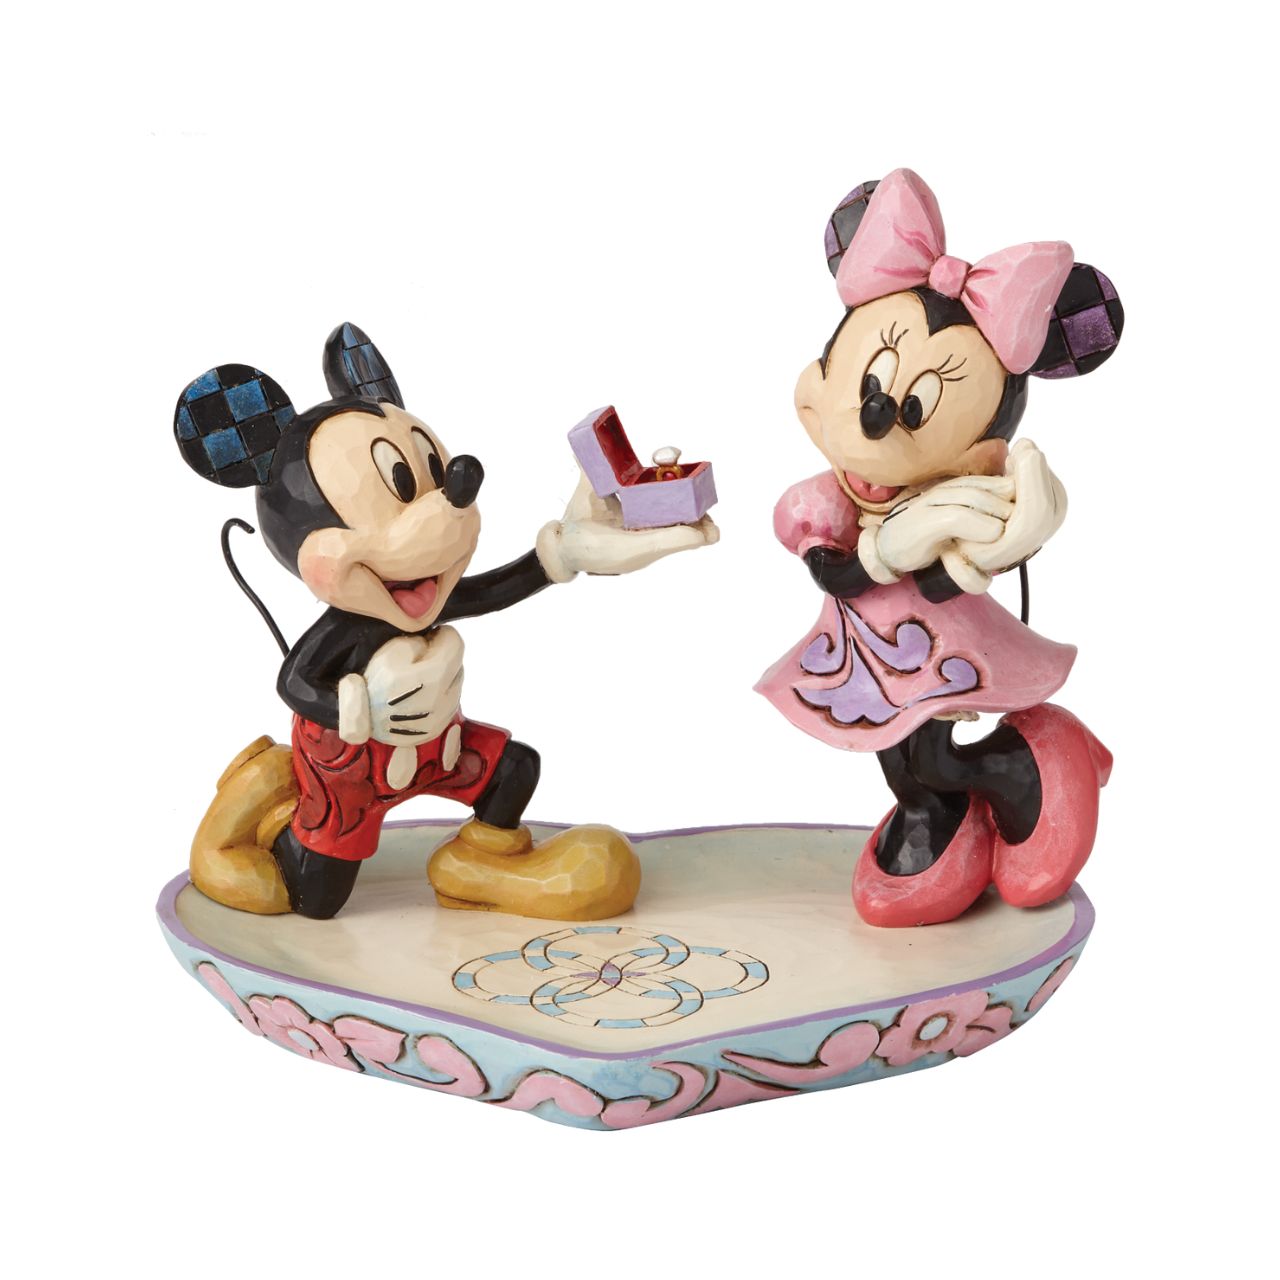 Disney A Magical Moment Mickey Proposing to Minnie Mouse Figurine  Mickey Mouse is the soul of romance as he proposes to a love-struck Minnie Mouse in this heartfelt design featuring the artistry of Jim Shore.